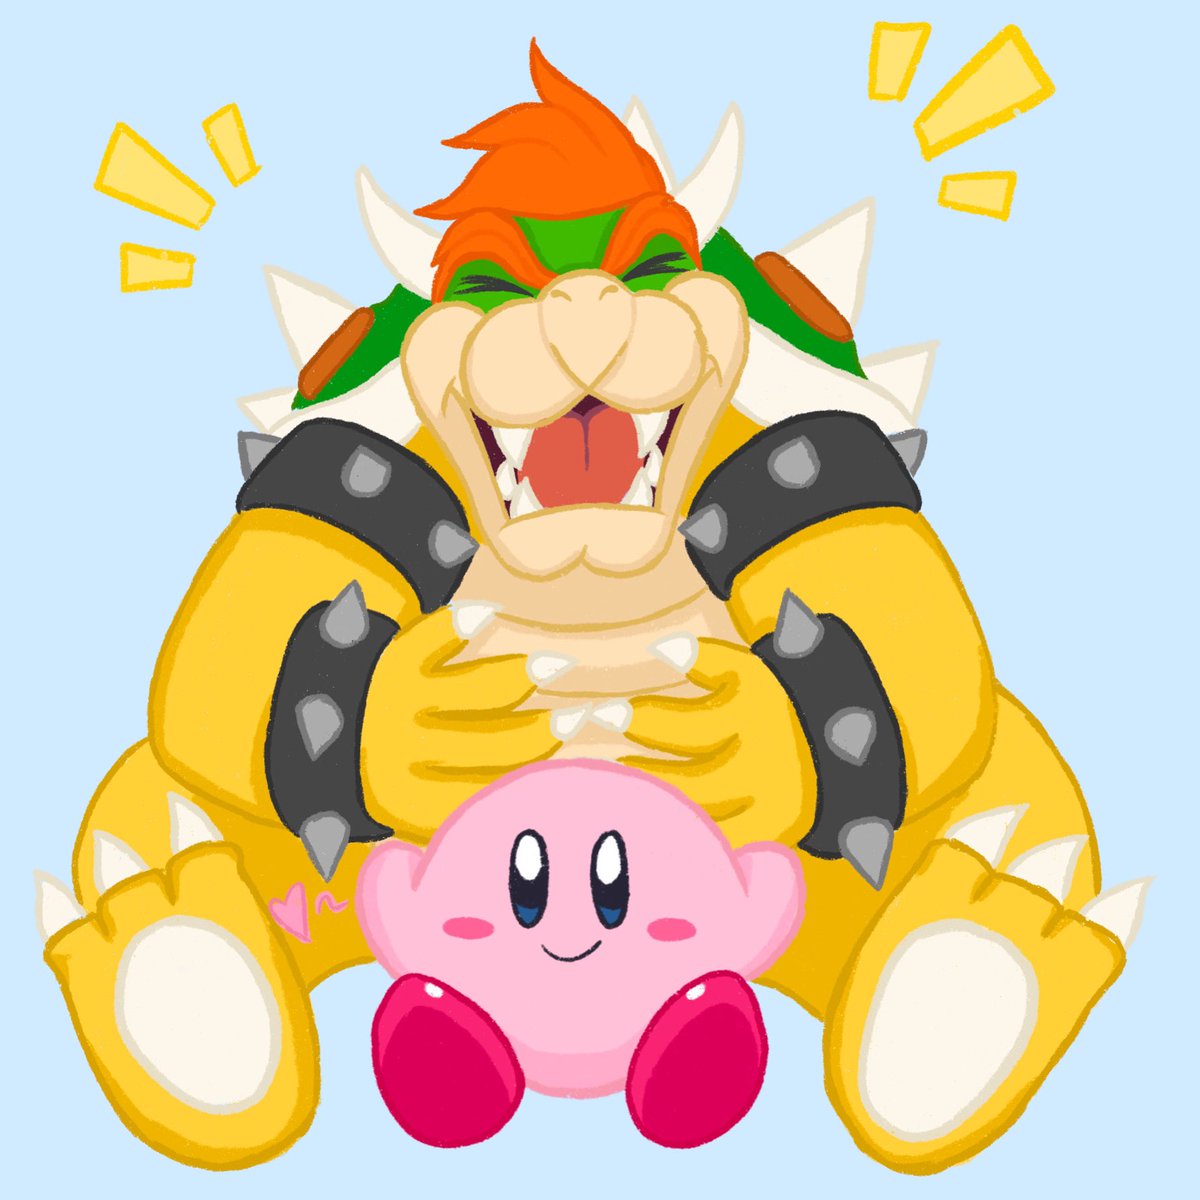 hanna on X: i love bowser and kirby so why not draw them together being  cute 🤝 t.co1i74clJ9pU  X